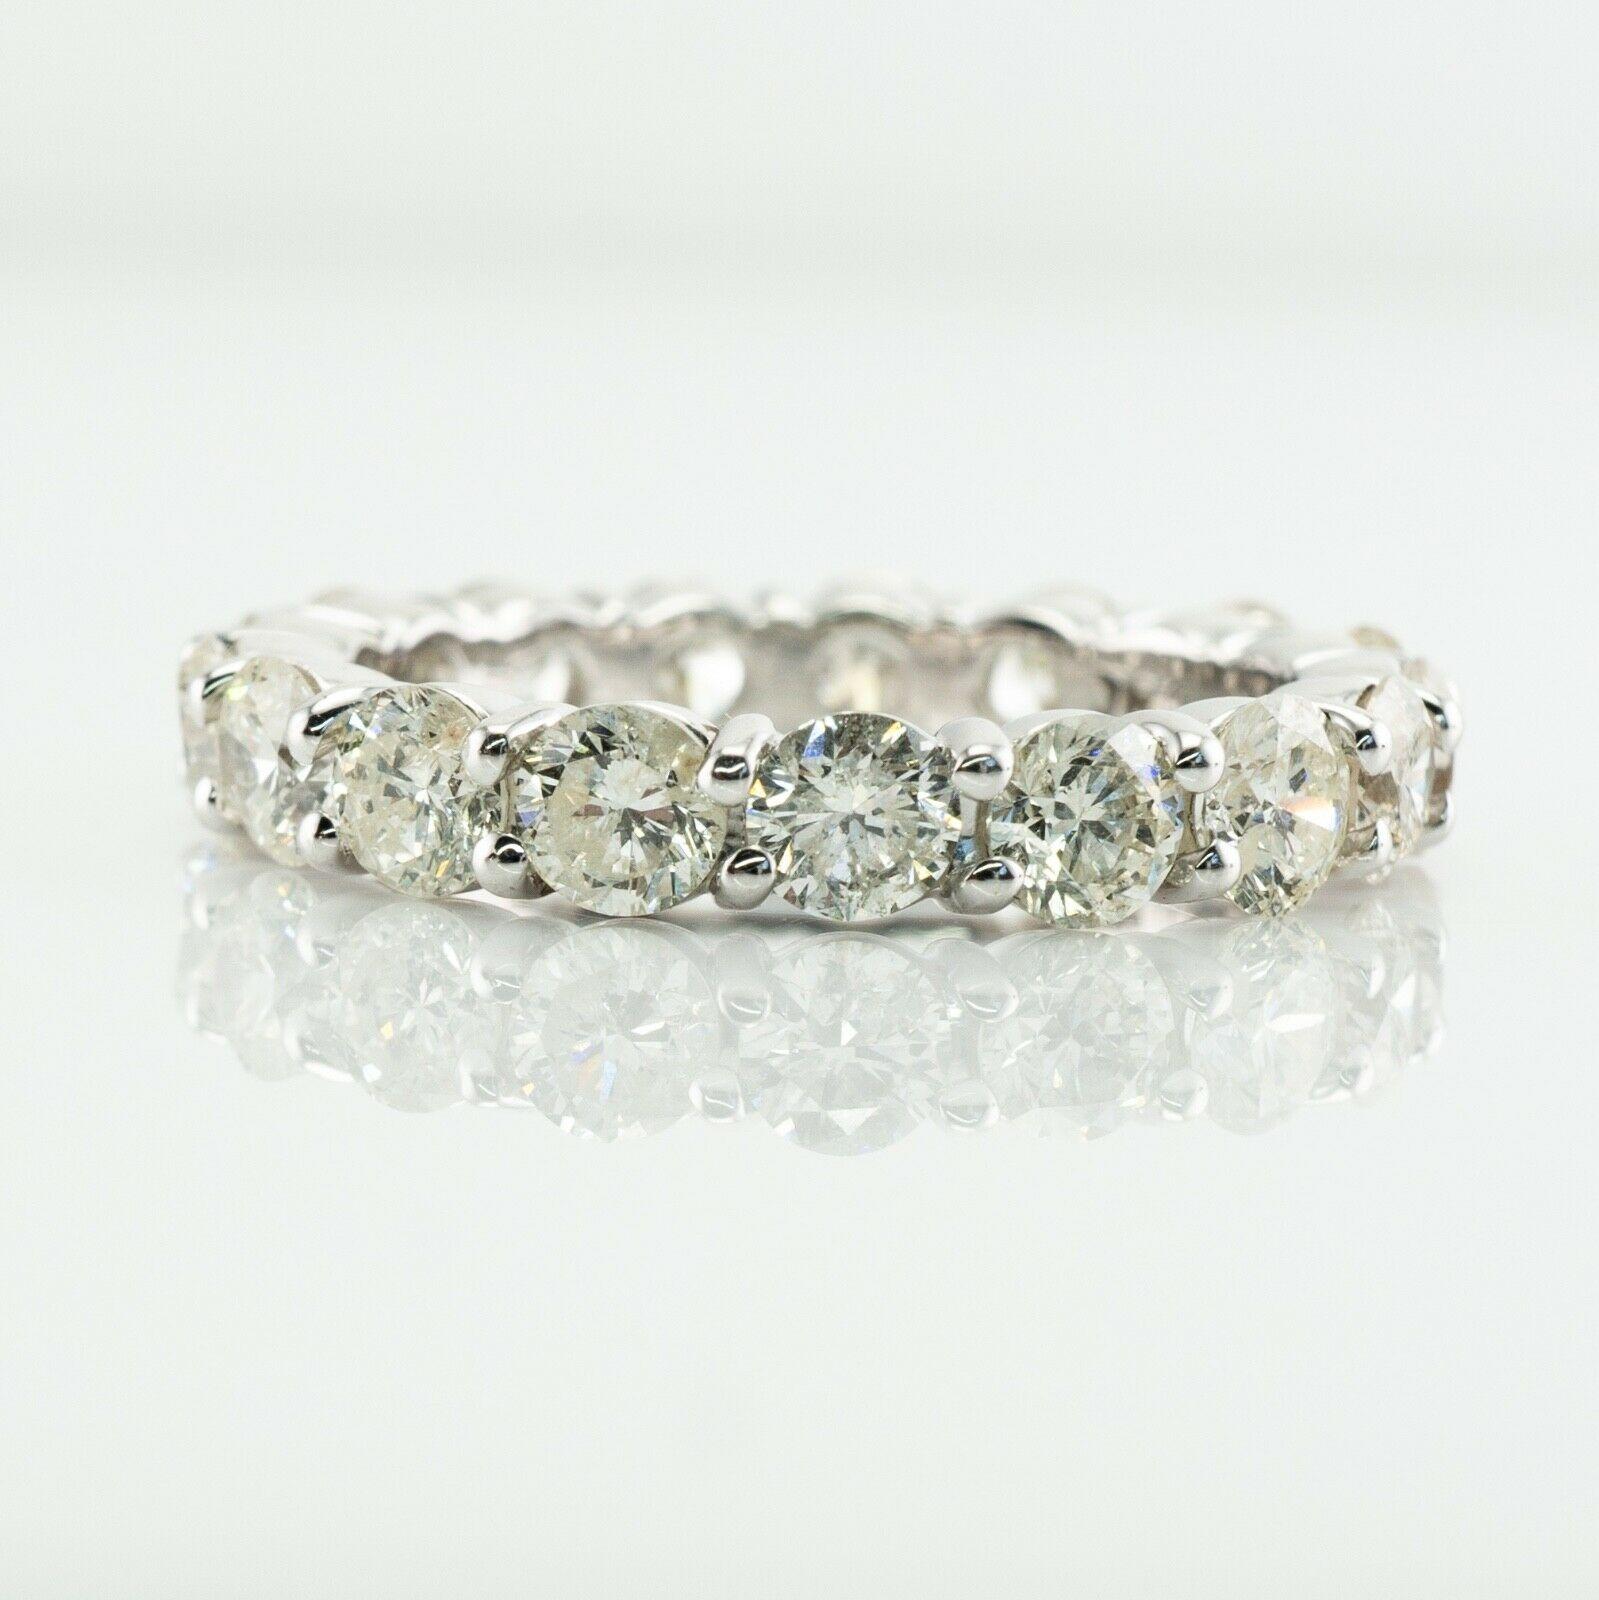 Diamond Eternity Ring Band 14K White Gold 3.40 TDW sz. 7
This gorgeous estate ring is finely crafted in solid 14K White gold (carefully tested and guaranteed). 17 round brilliant cut diamonds all go around, no beginning, no end. These diamonds total